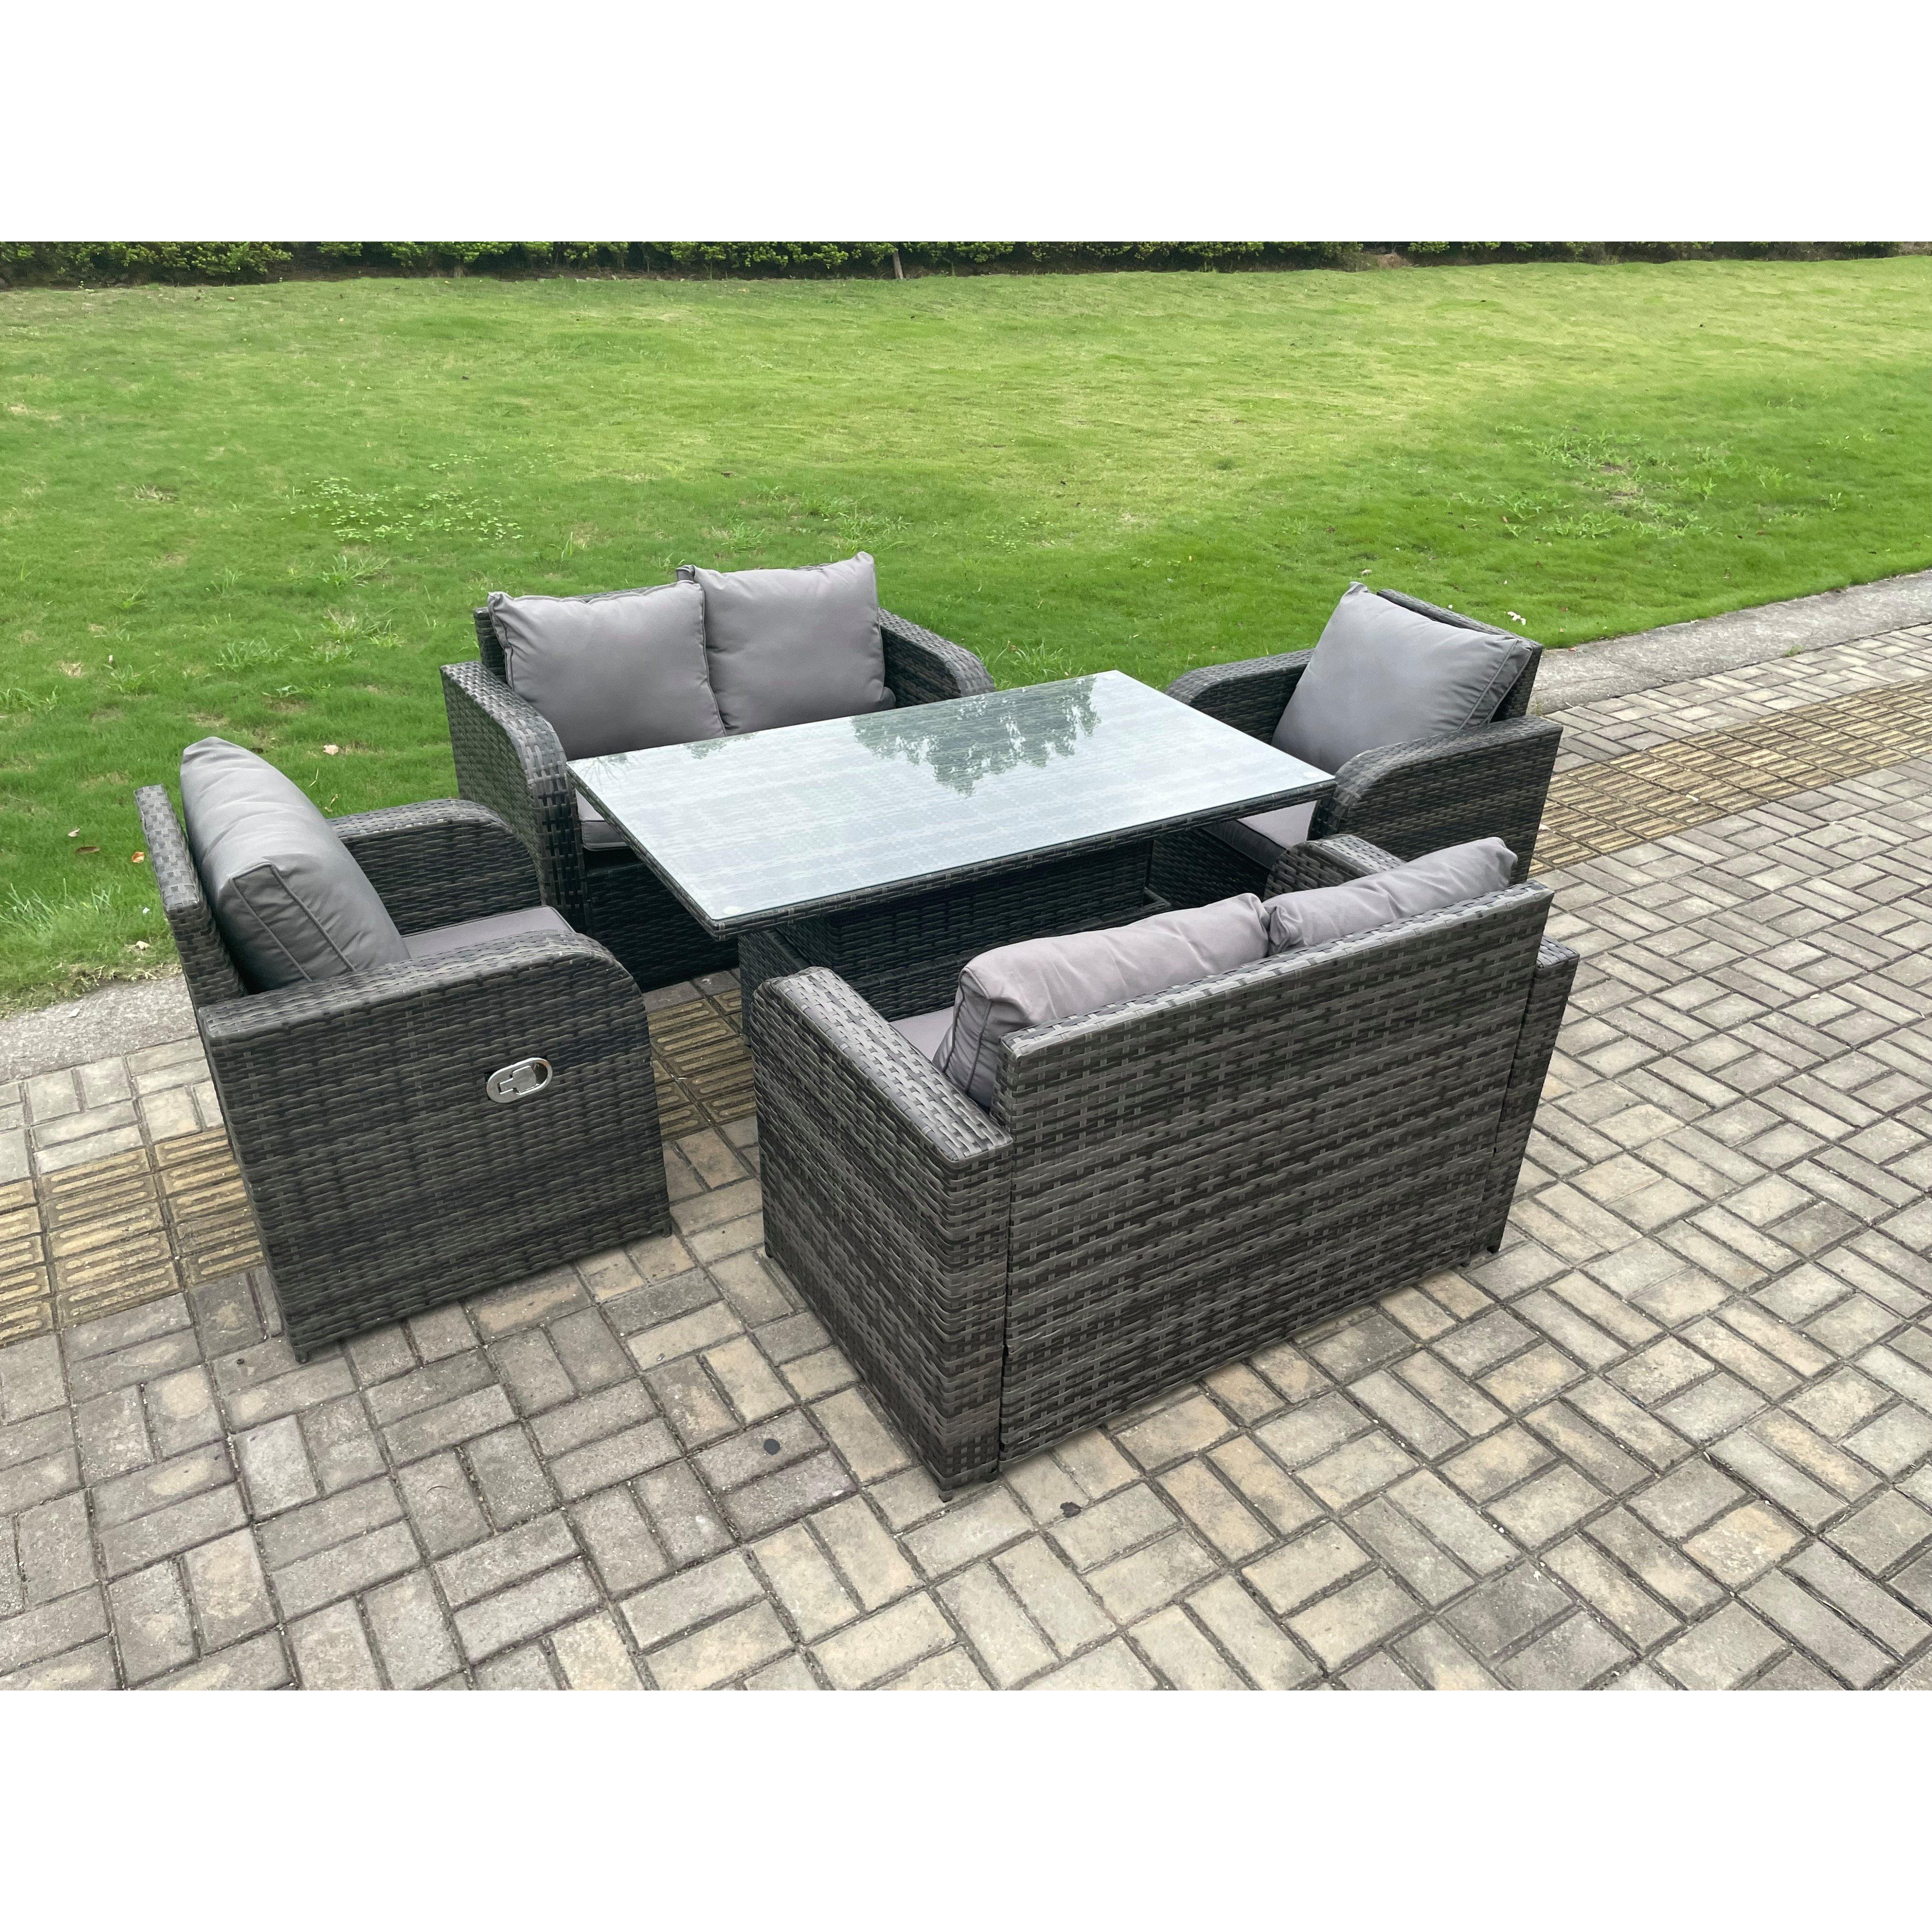 Rattan Furniture Outdoor Garden Dining Set Patio Height Adjustable Rising lifting Table Love Sofa Chair Set - image 1